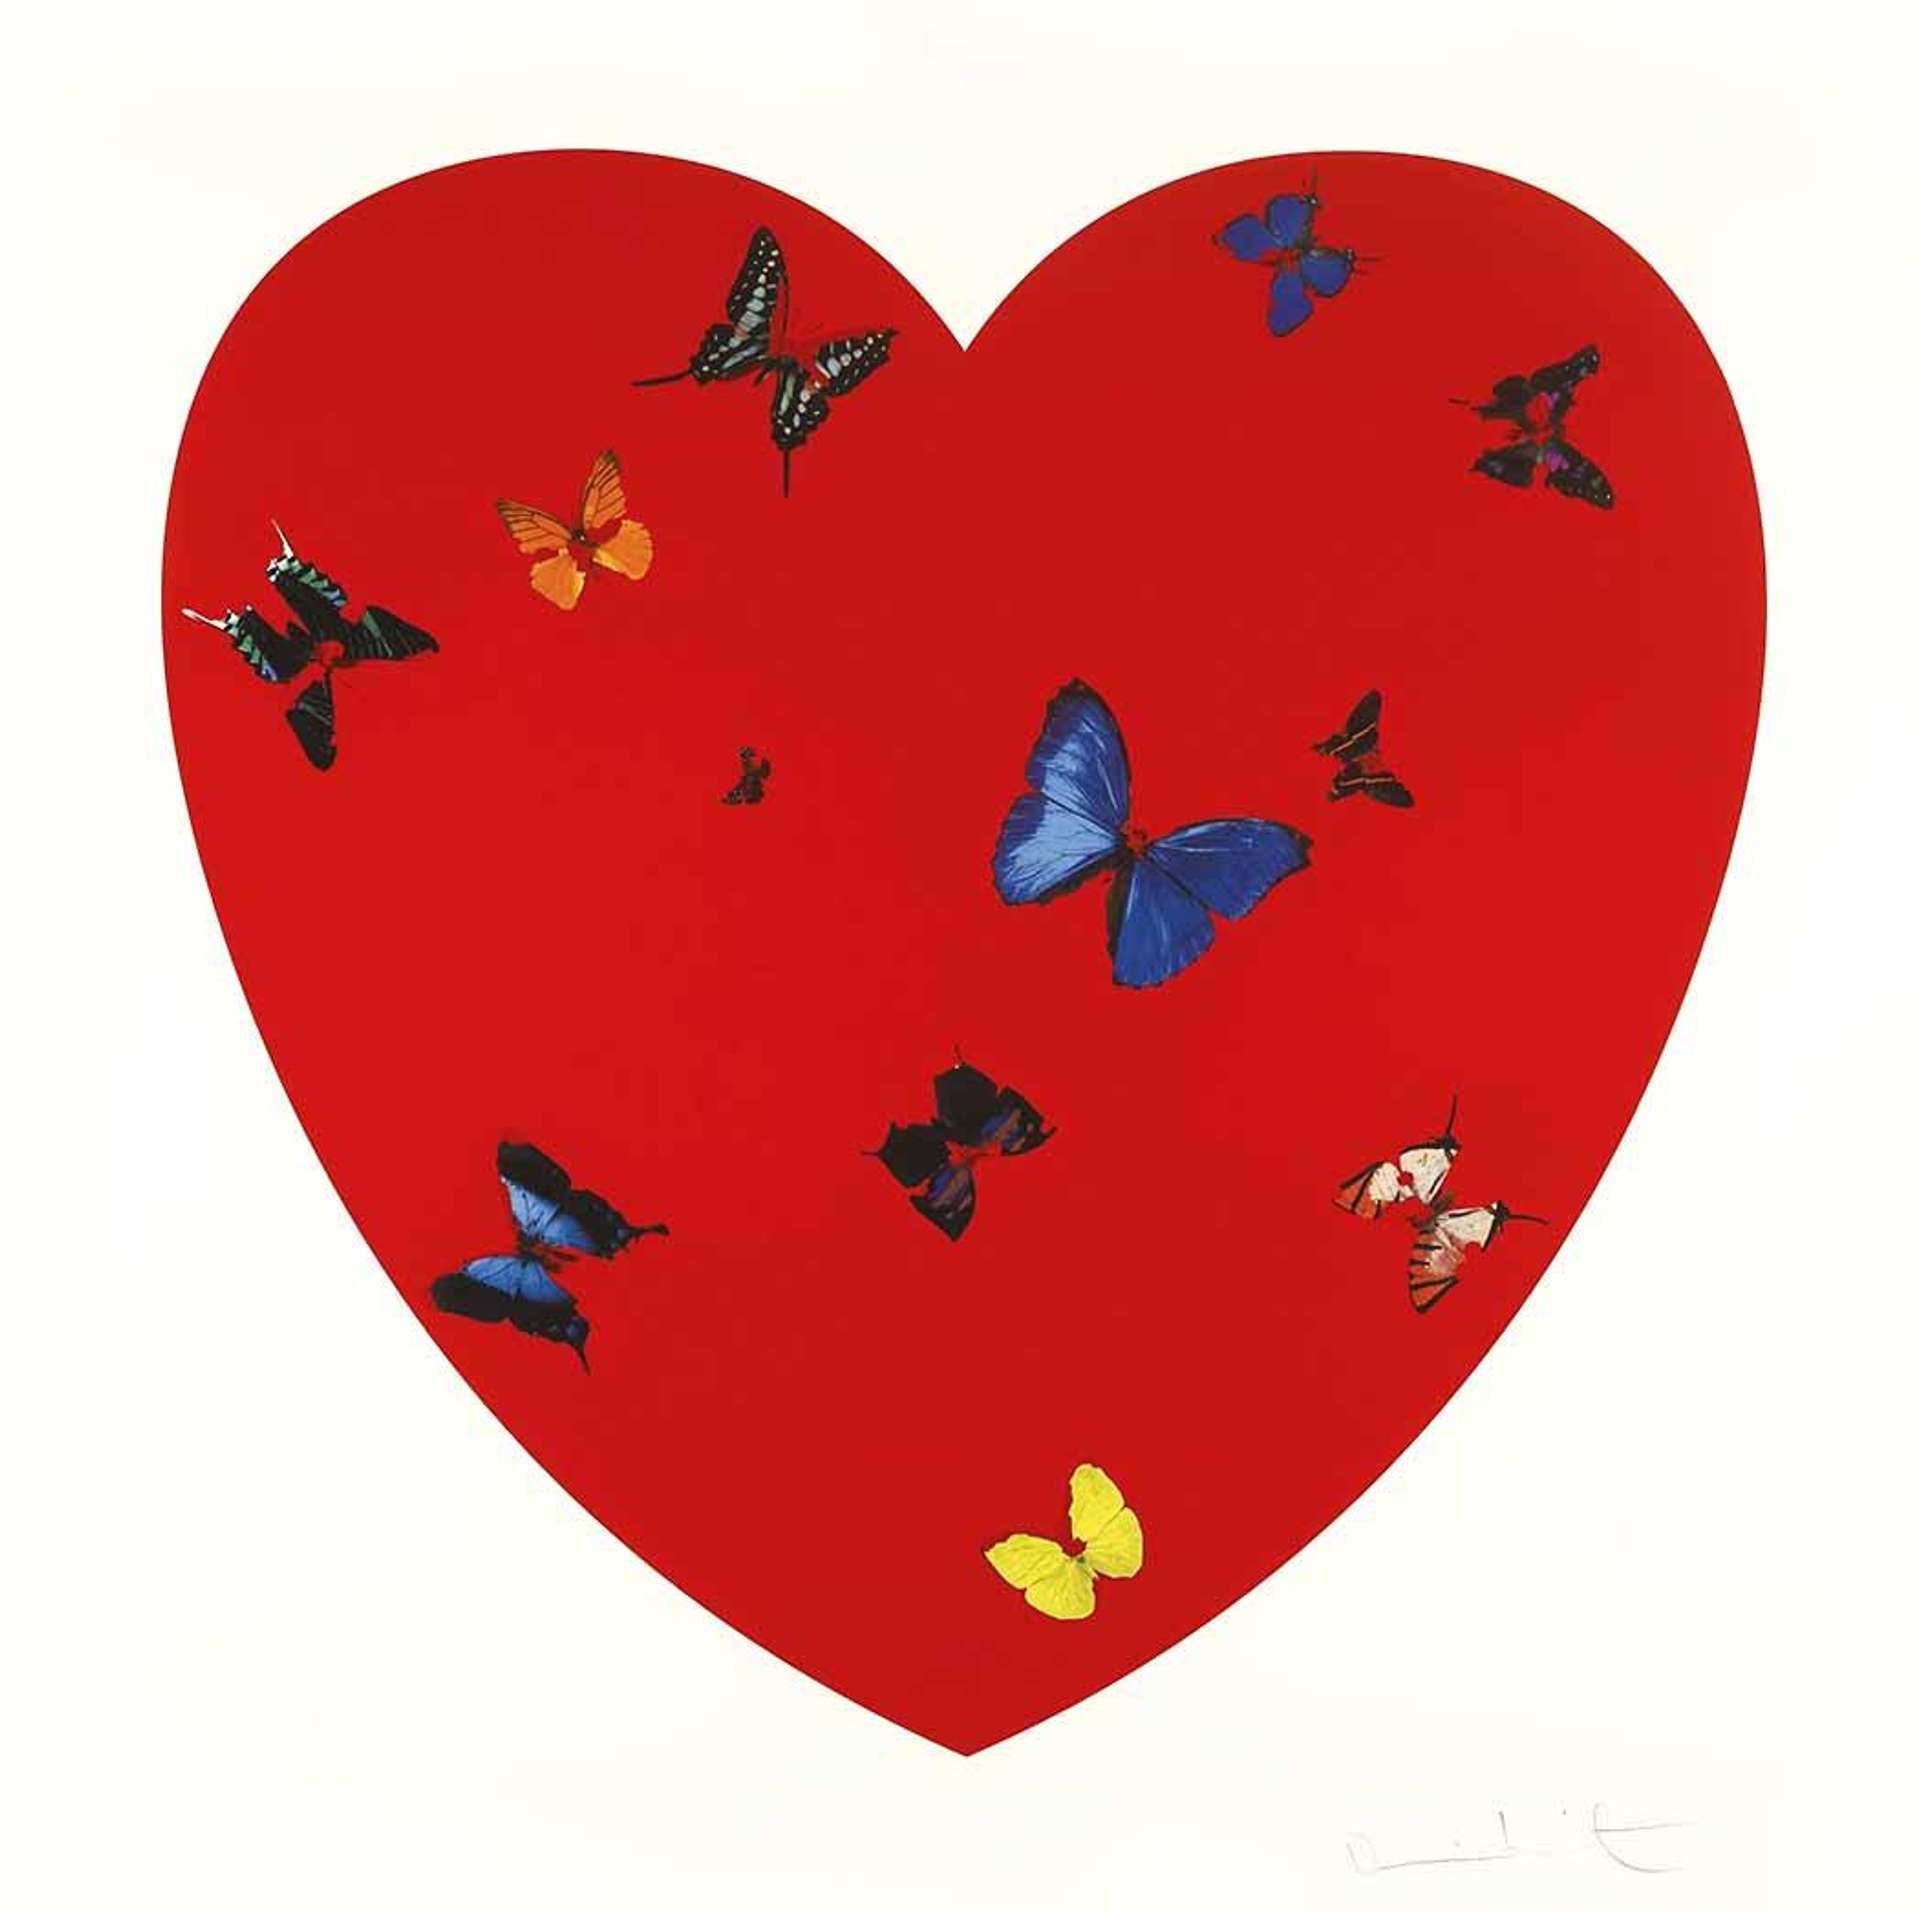 All You Need Is Love Love Love by Damien Hirst